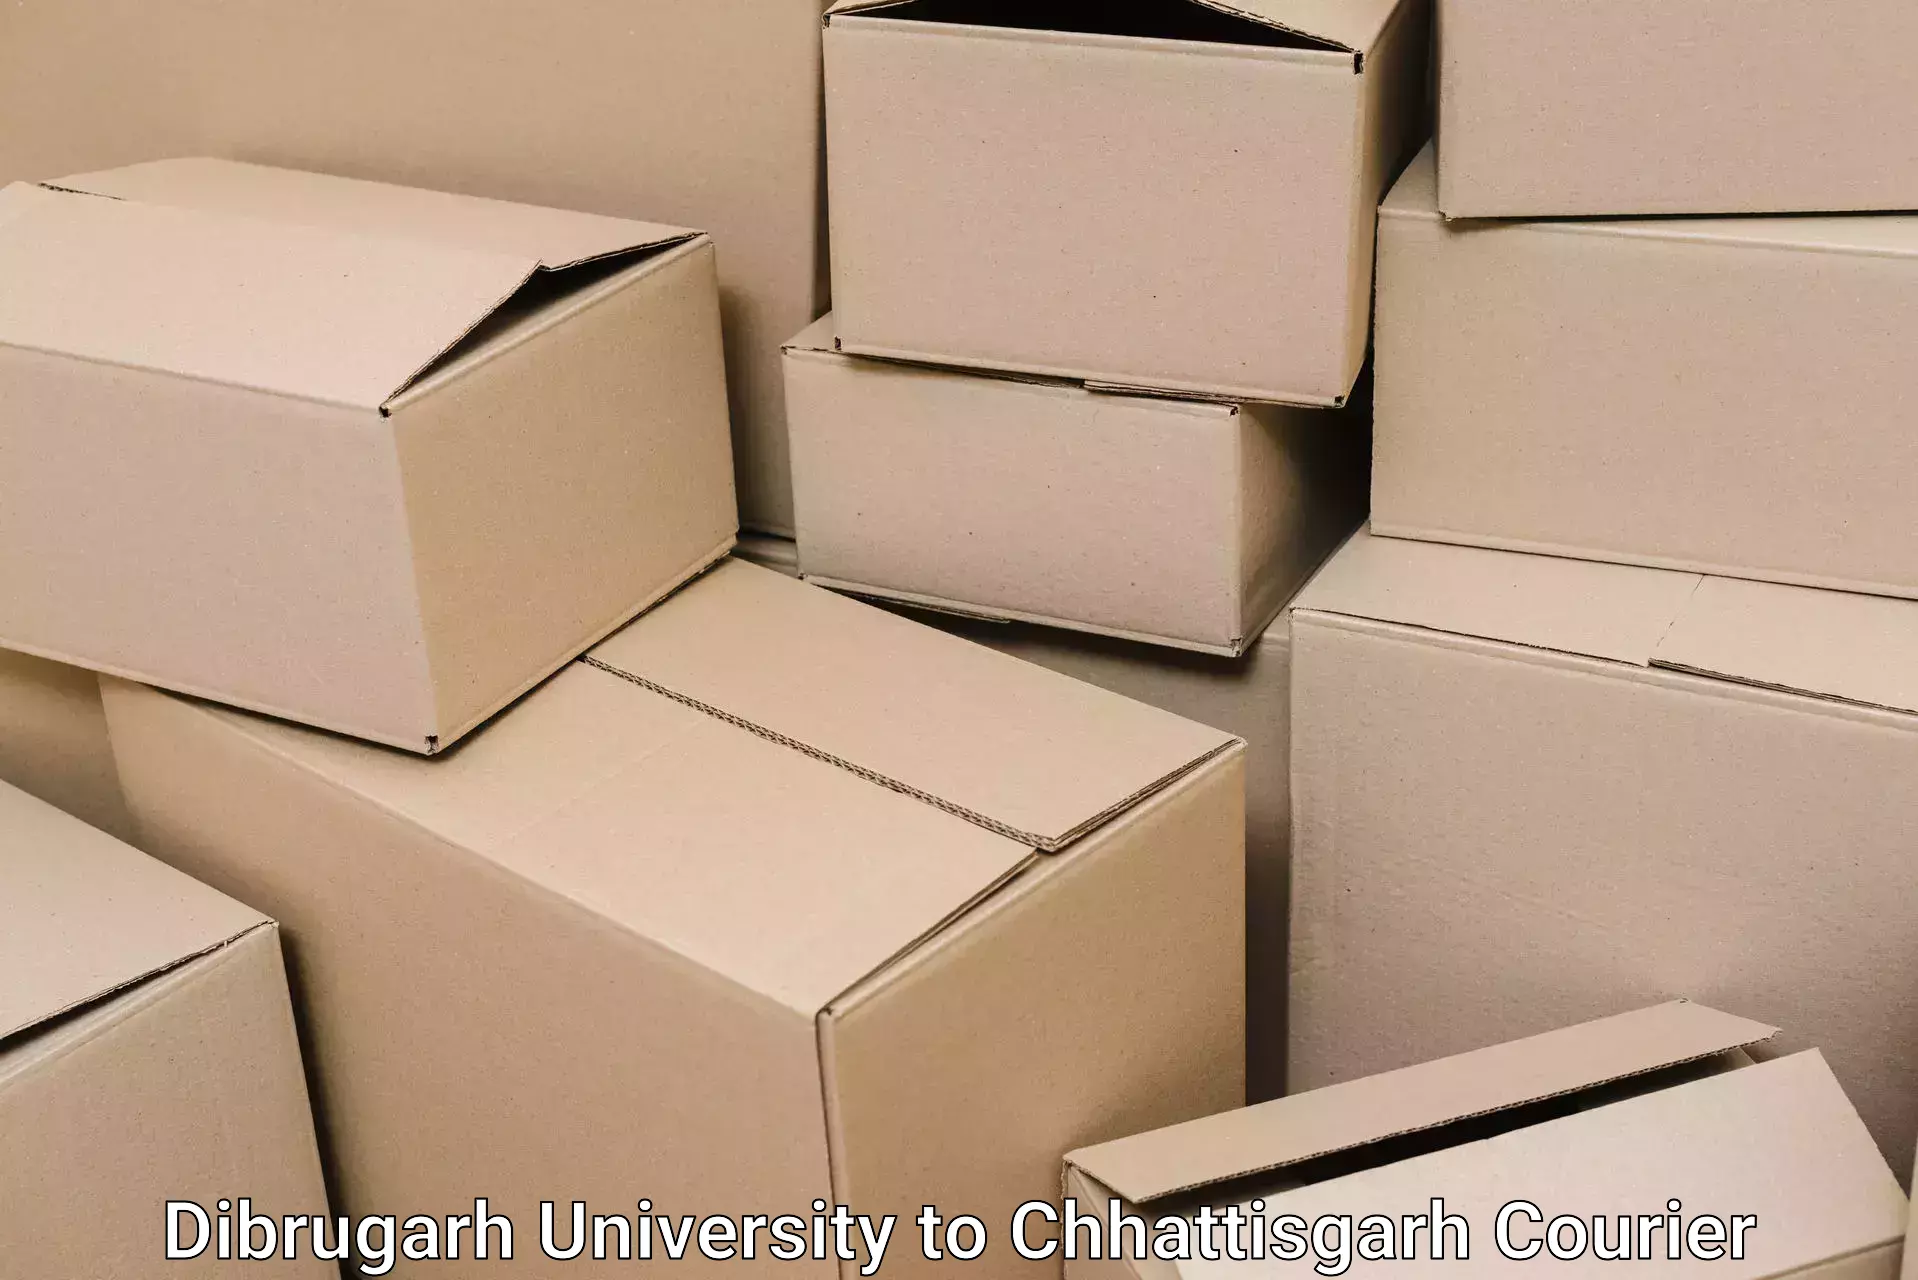 Quality household movers Dibrugarh University to bagbahra